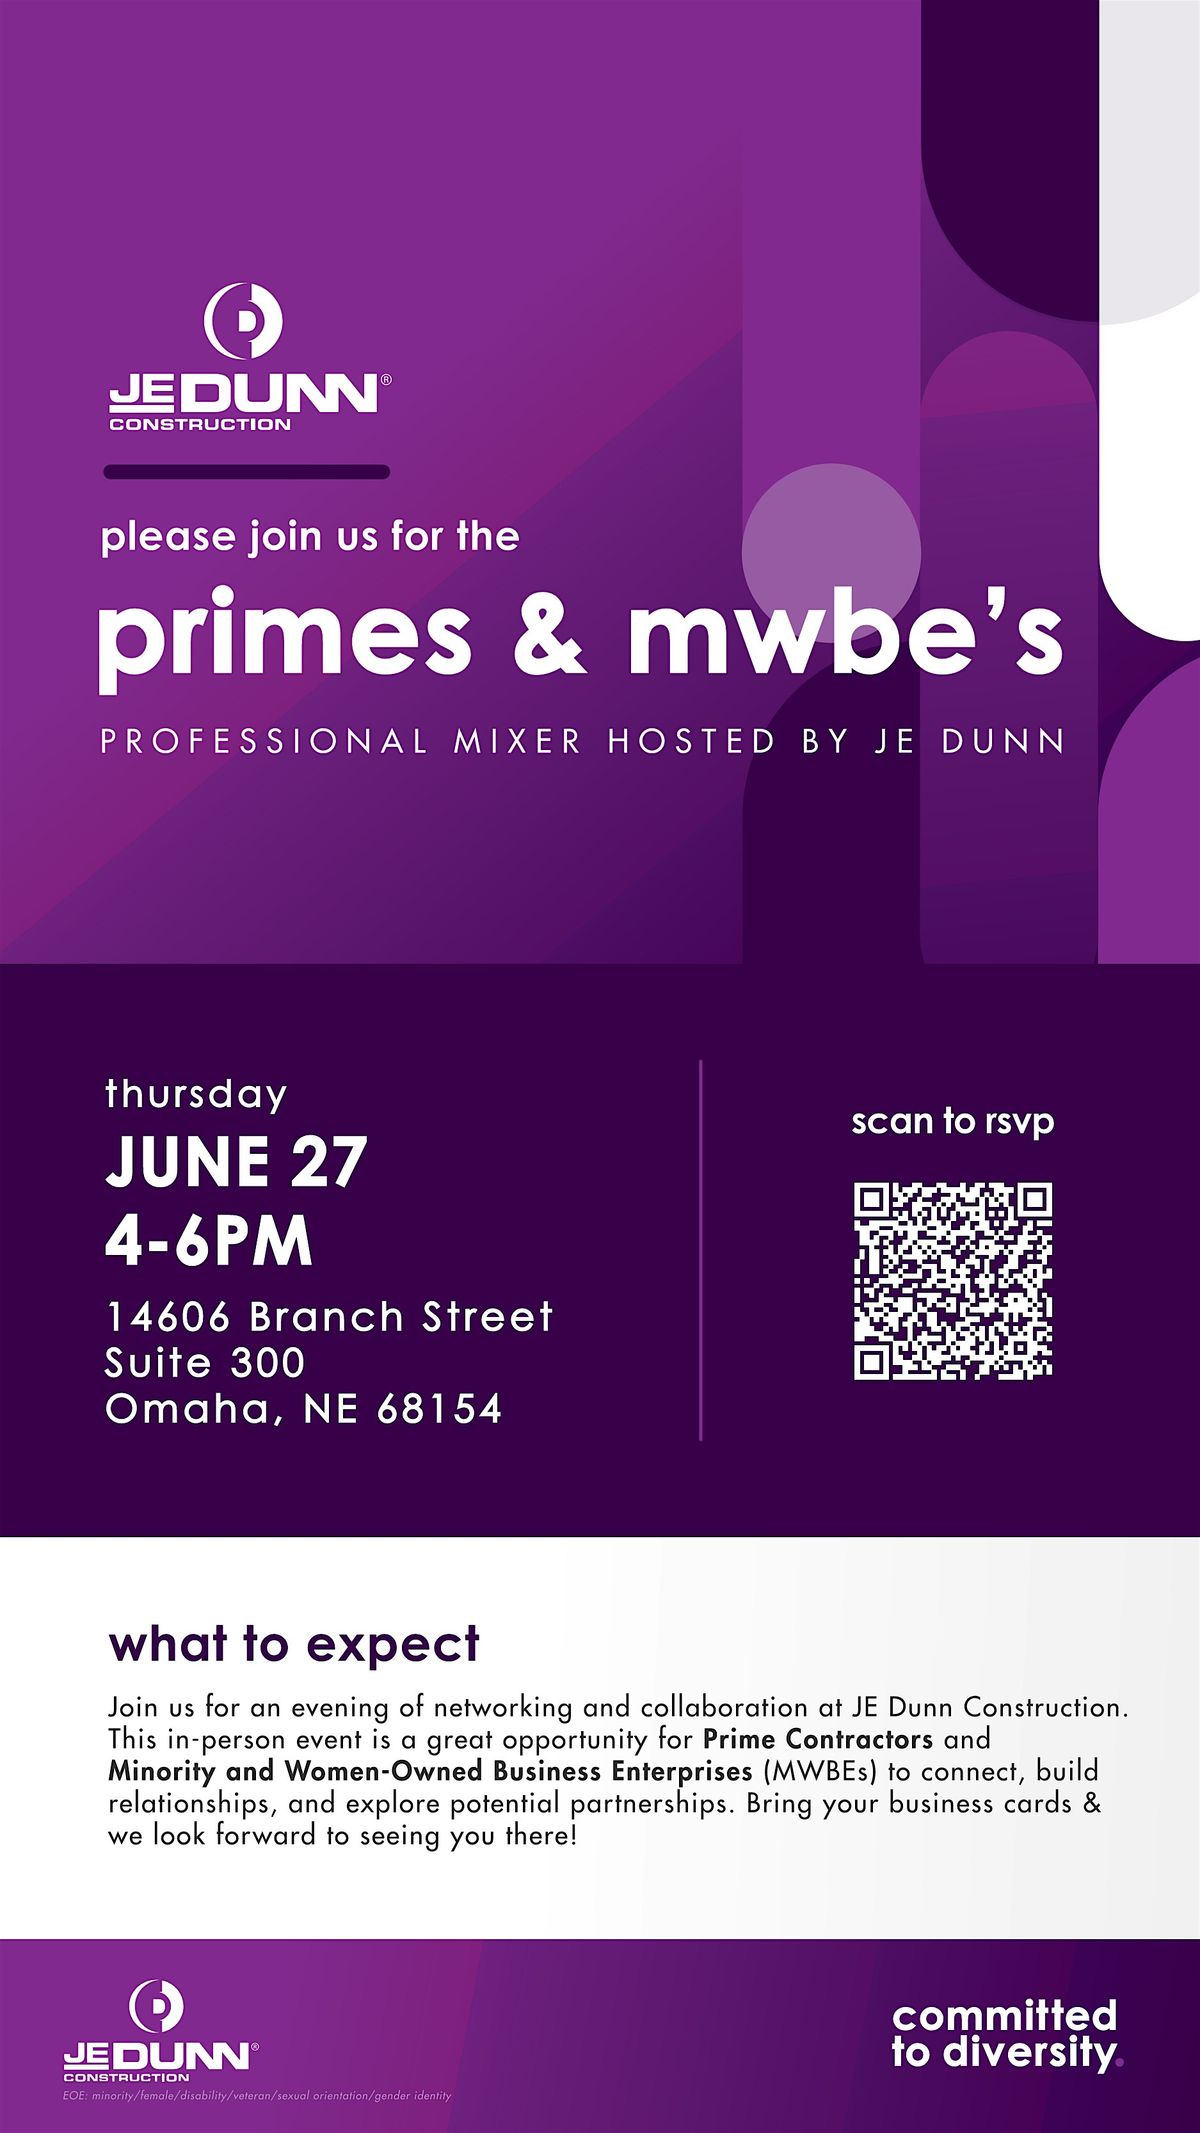 Professional Mixer: Primes & MWBEs hosted by JE Dunn!